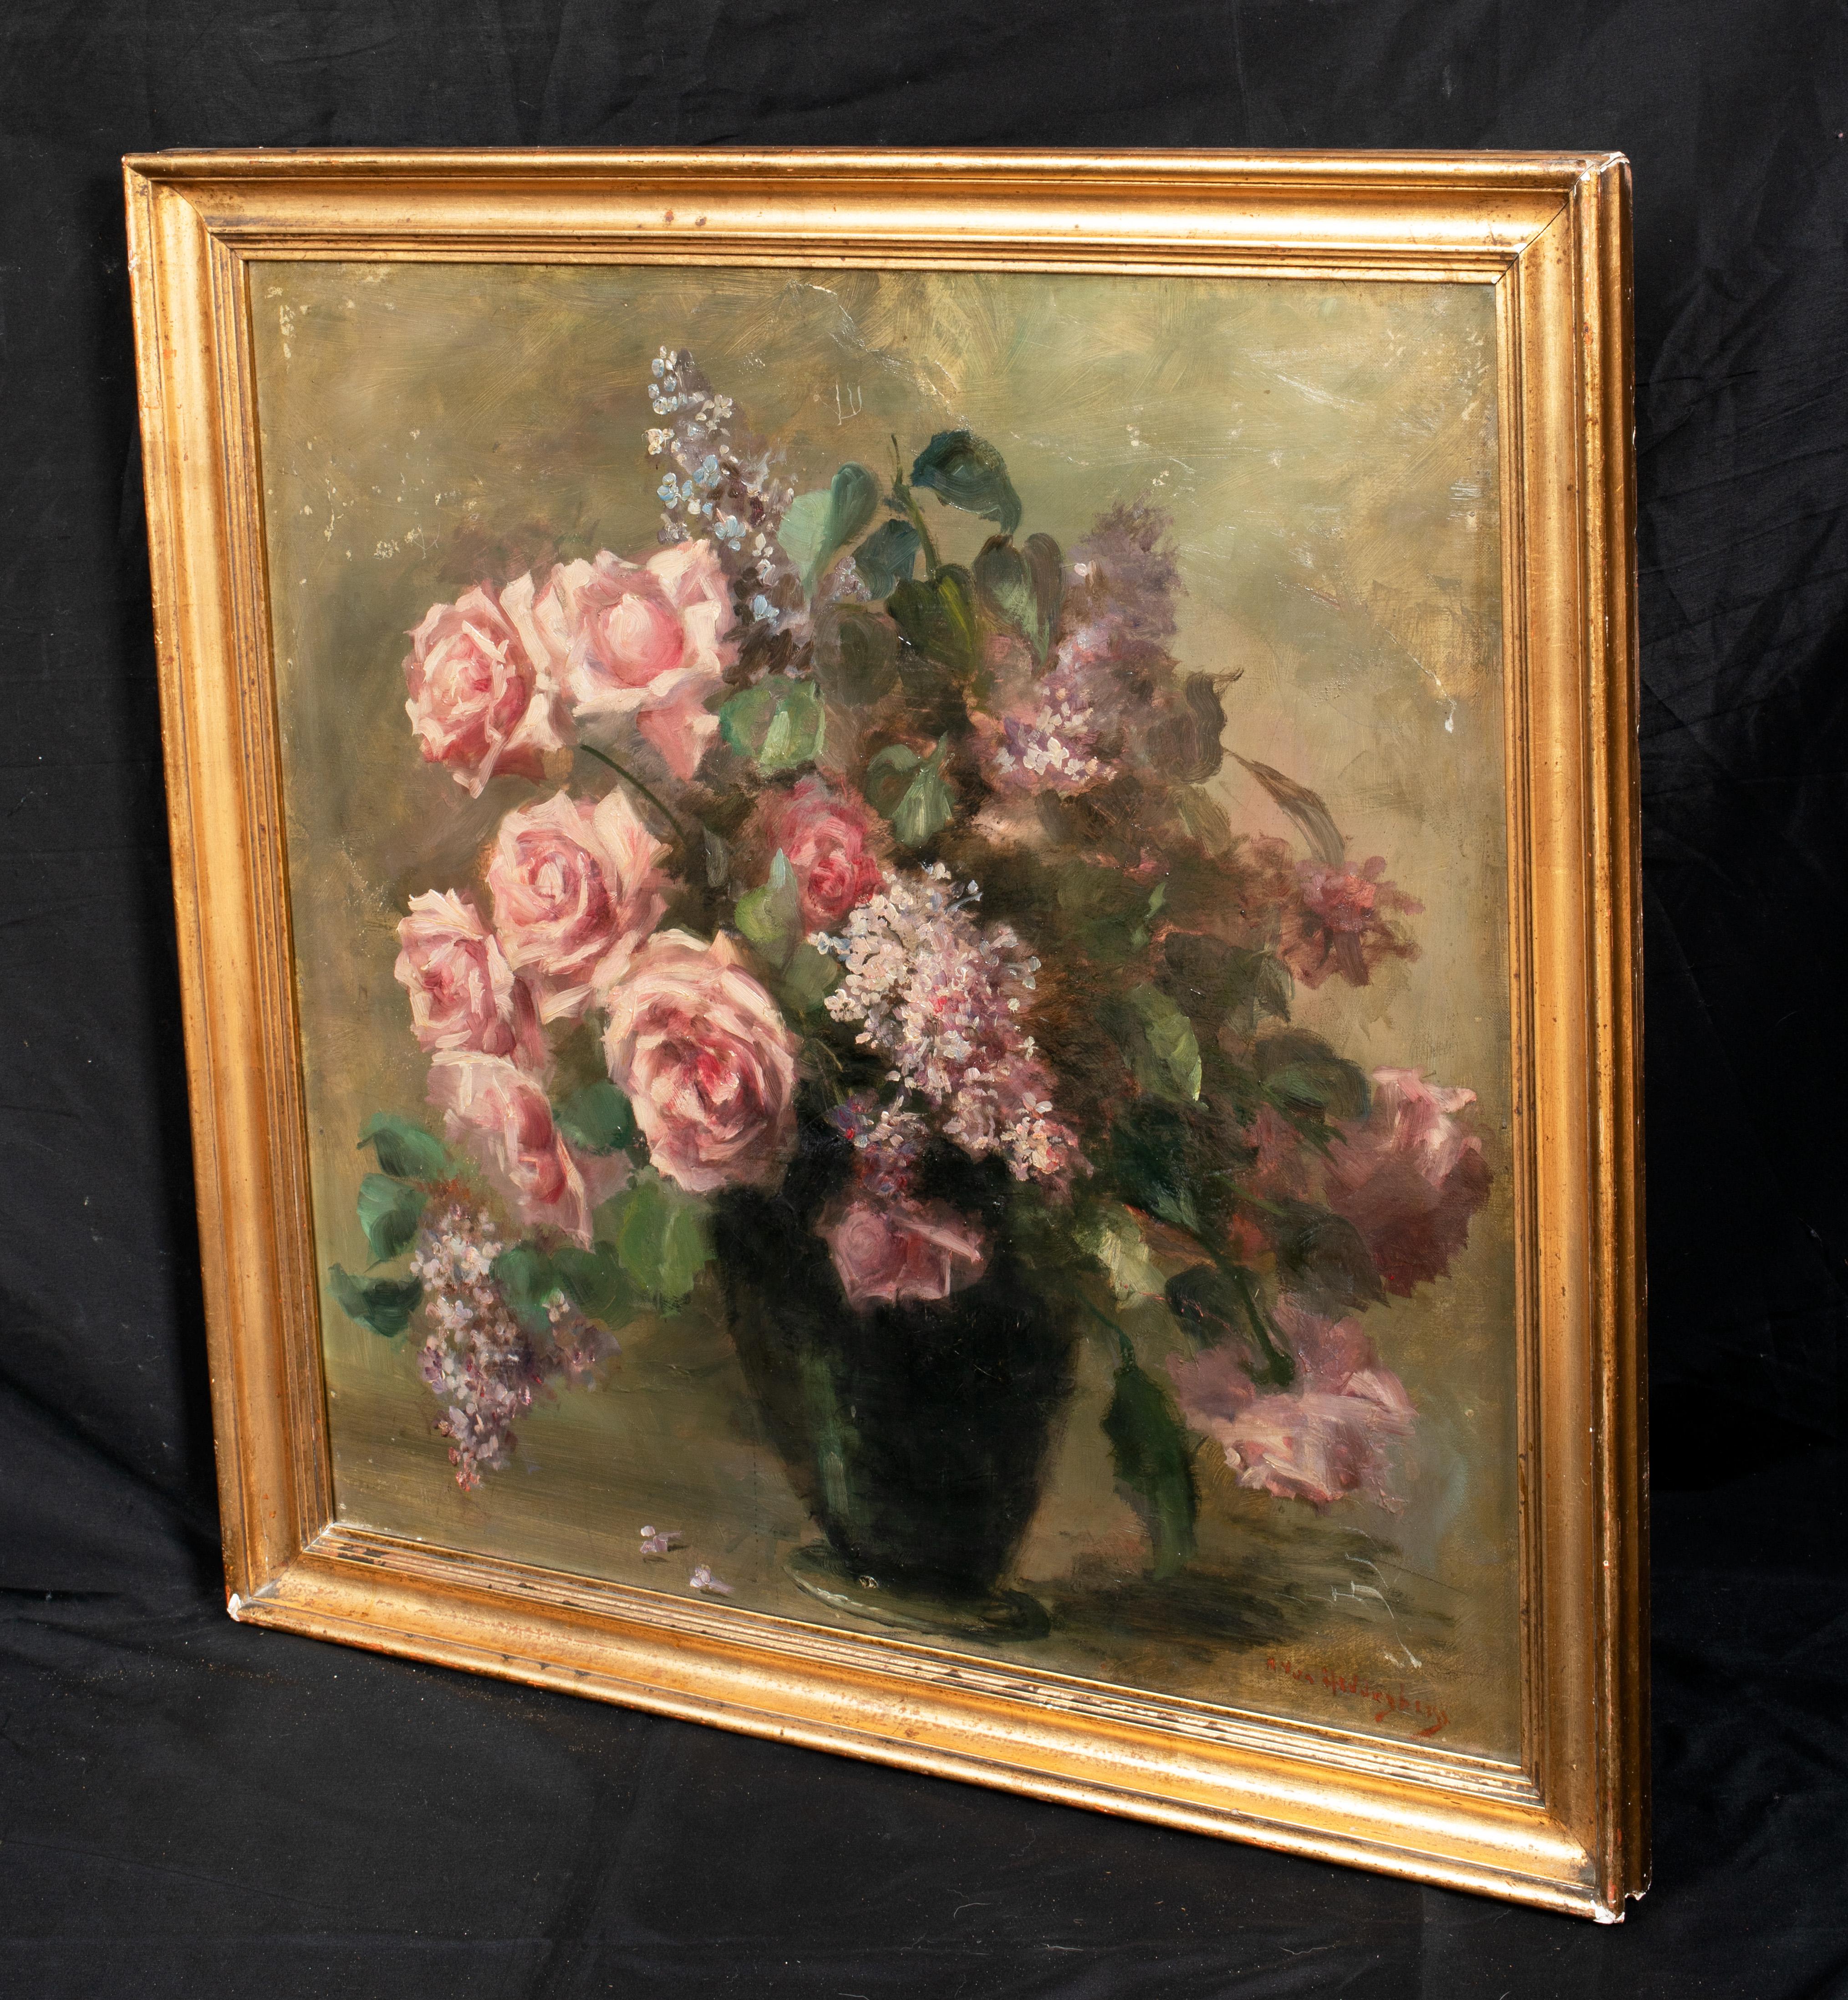 Study Of Pink Roses, 19th Century 

English School - signed

Large 19th Century Still life study of pink roses, oil on canvas, signed indistinctly. Good quality and condition circa 1900 Impressionist study of the flowers in a small black vase upon a